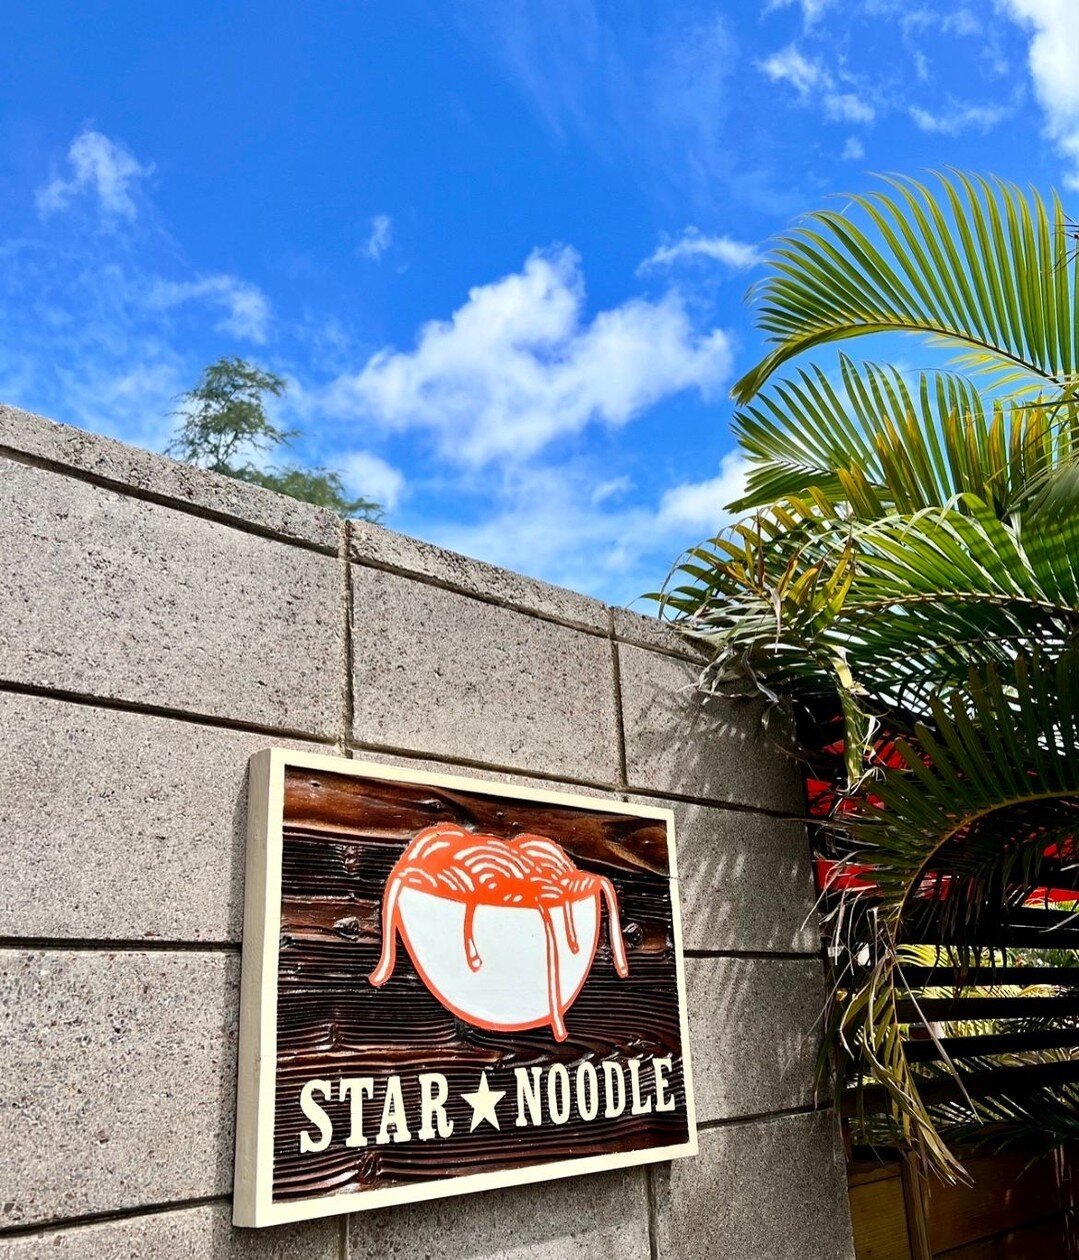 Did you know? Every Friday is &ldquo;Walk in Aloha Friday&rdquo; at Star Noodle! ✨🤙🏽

No Reservations Needed &bull; All Day &bull; Every Friday